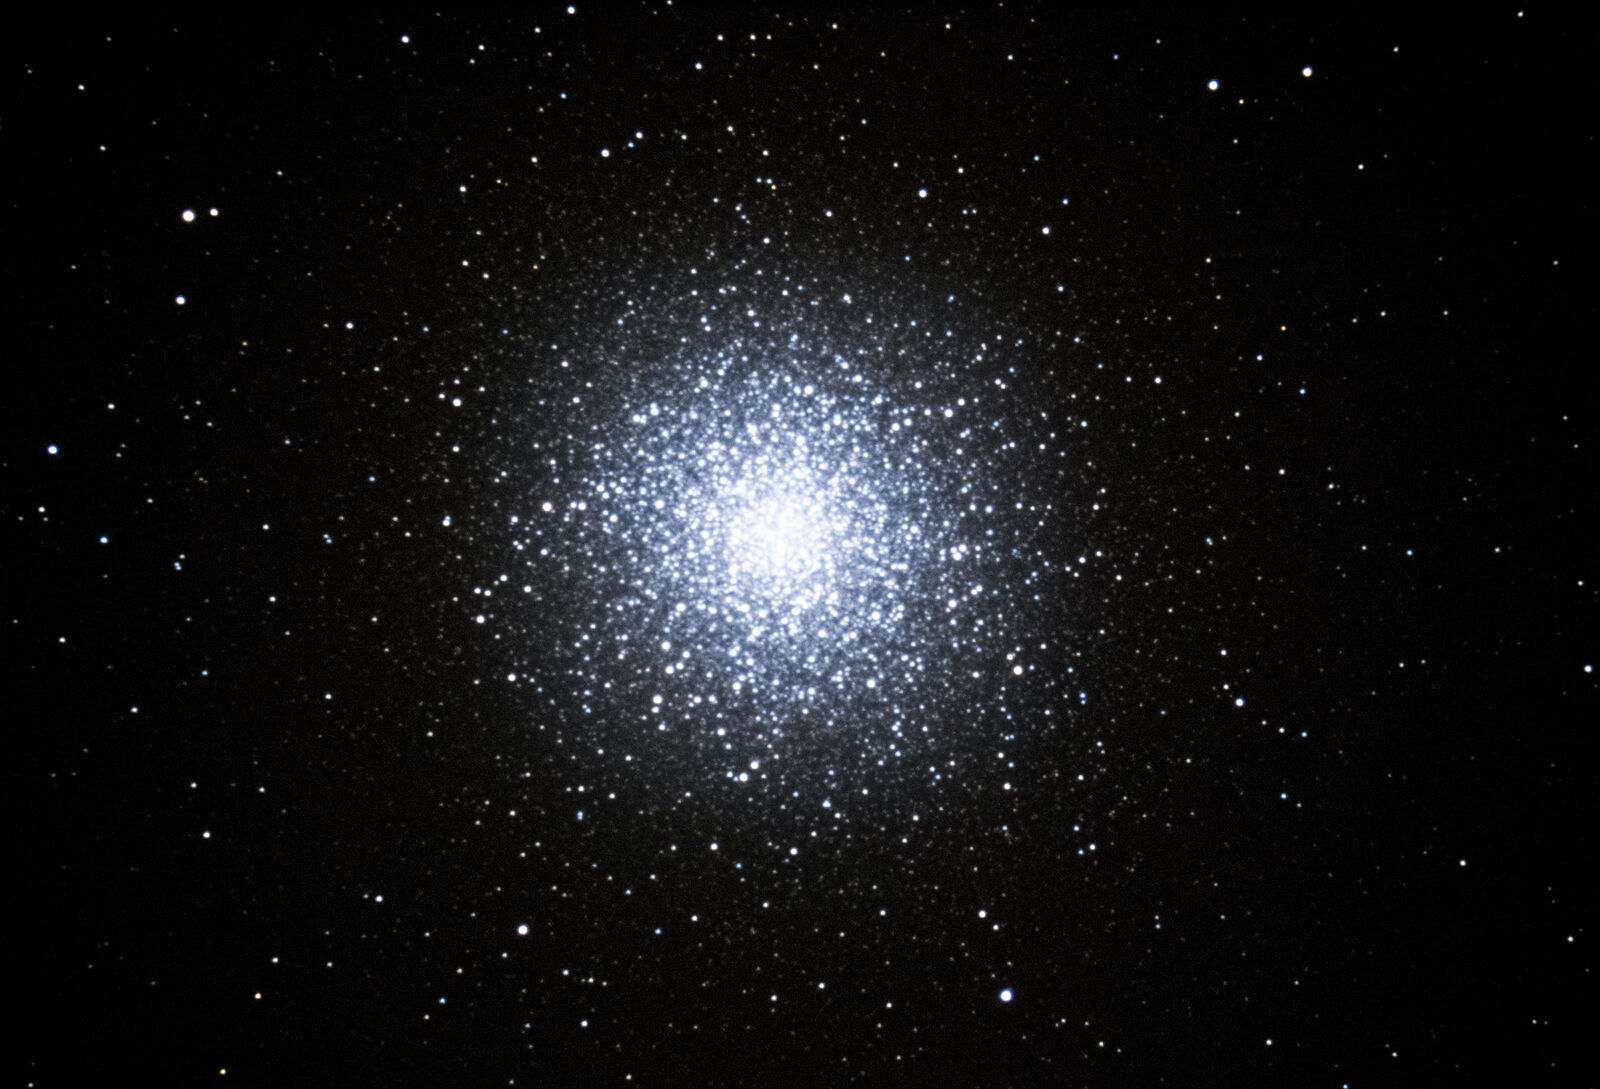 M13 taken with a Sony A7RIII camera mounted on a C14